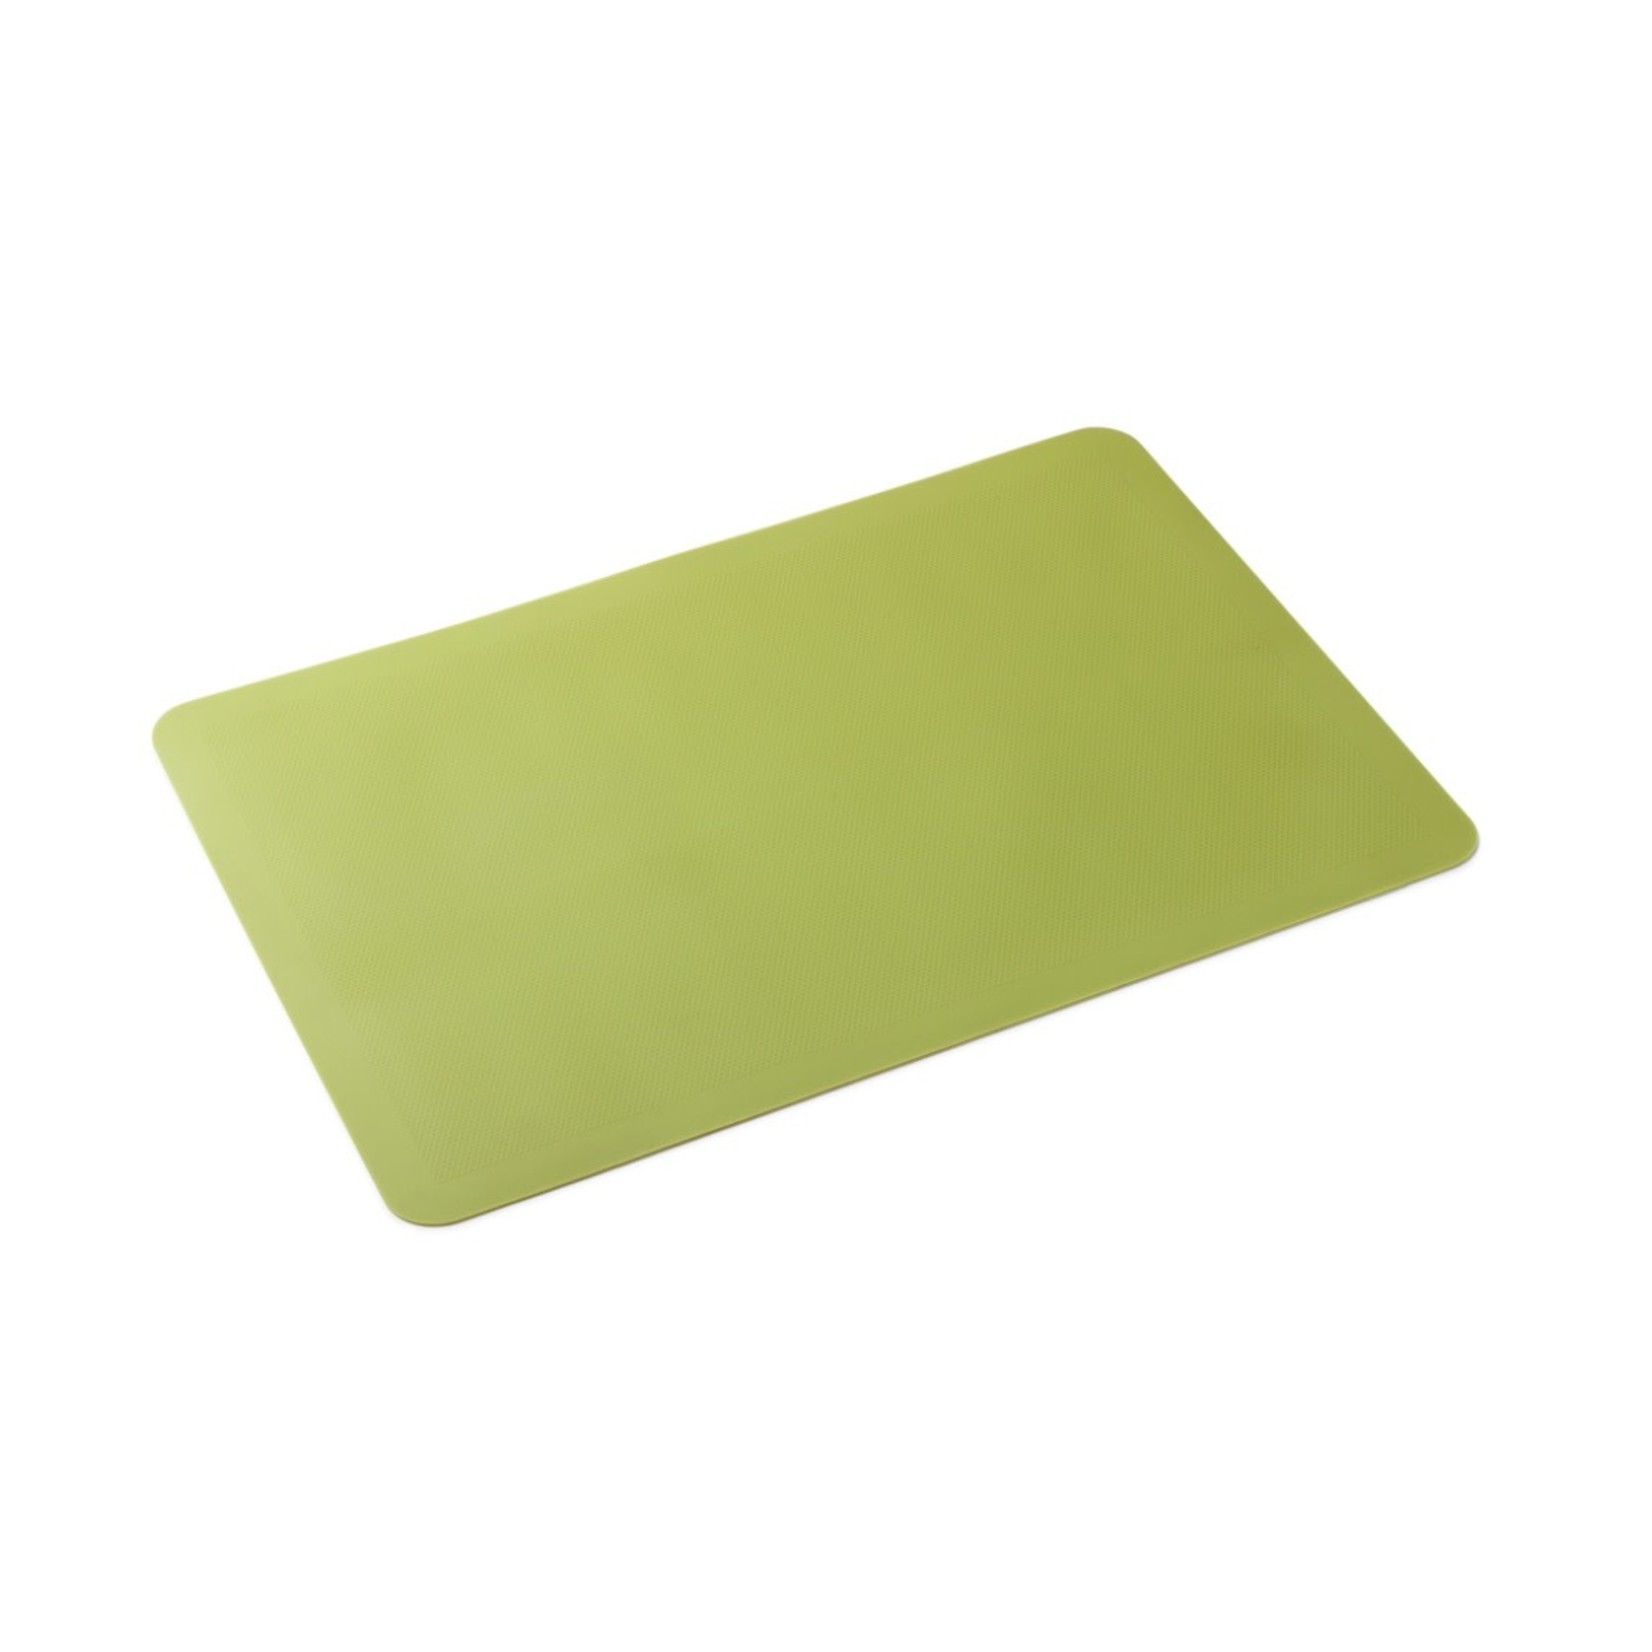 ZEAL Silicone Baking Mat 42x30cm - Assorted